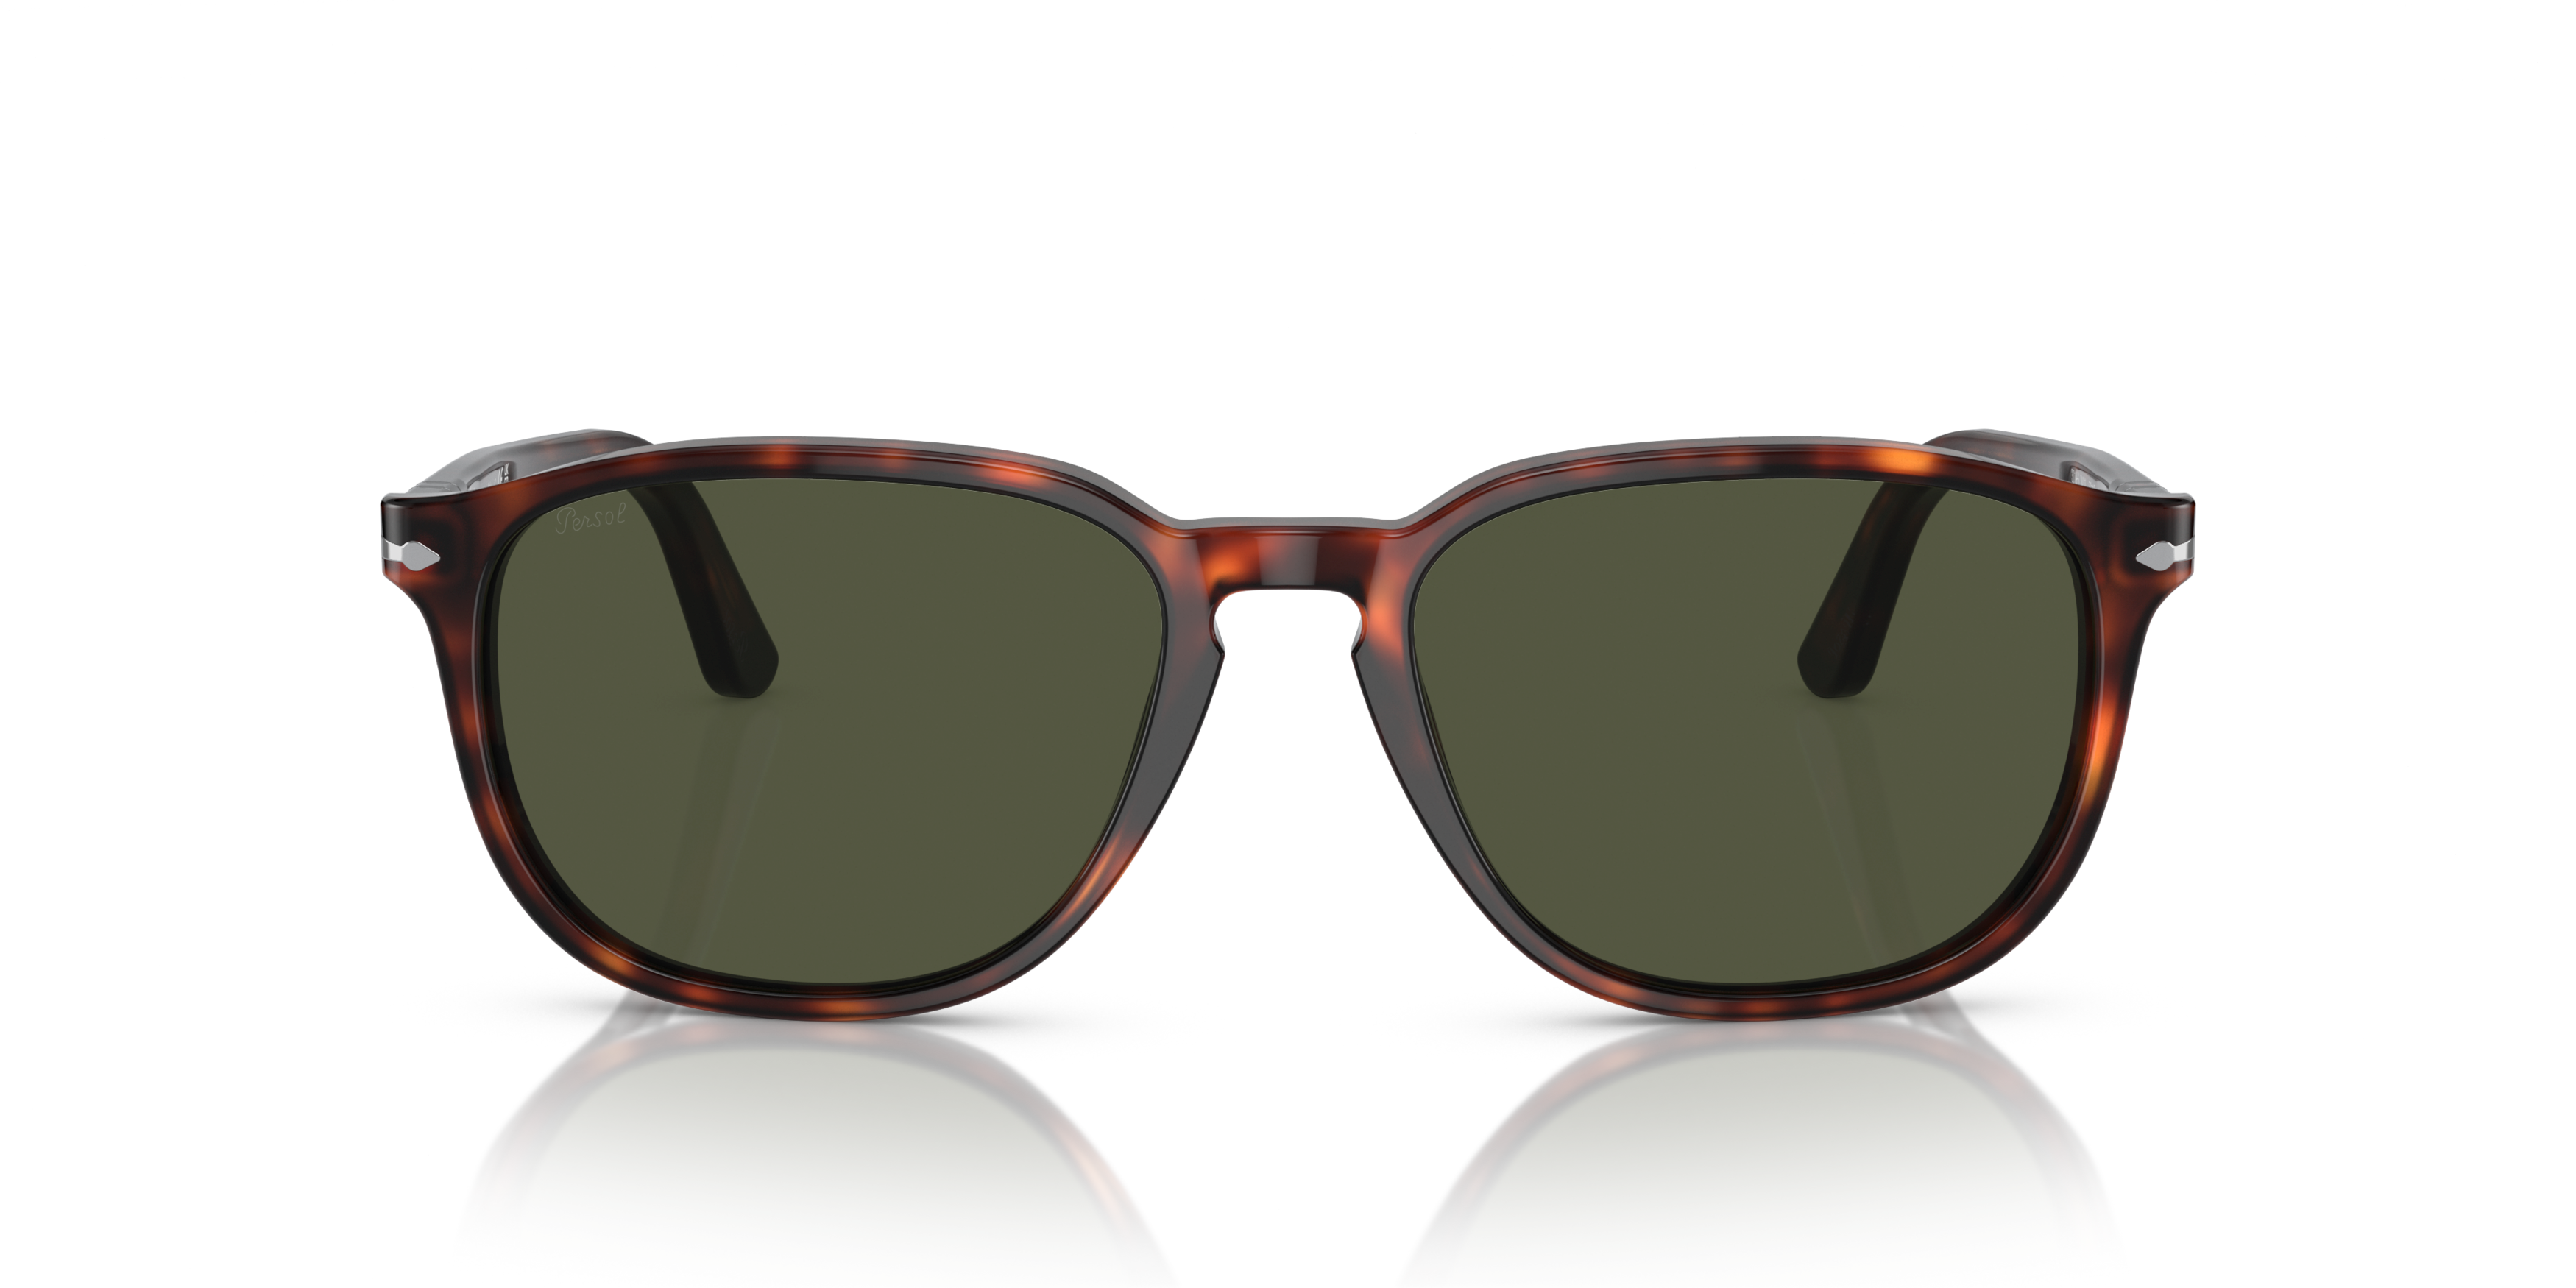 [products.image.front] Persol 0PO3019S 24/31